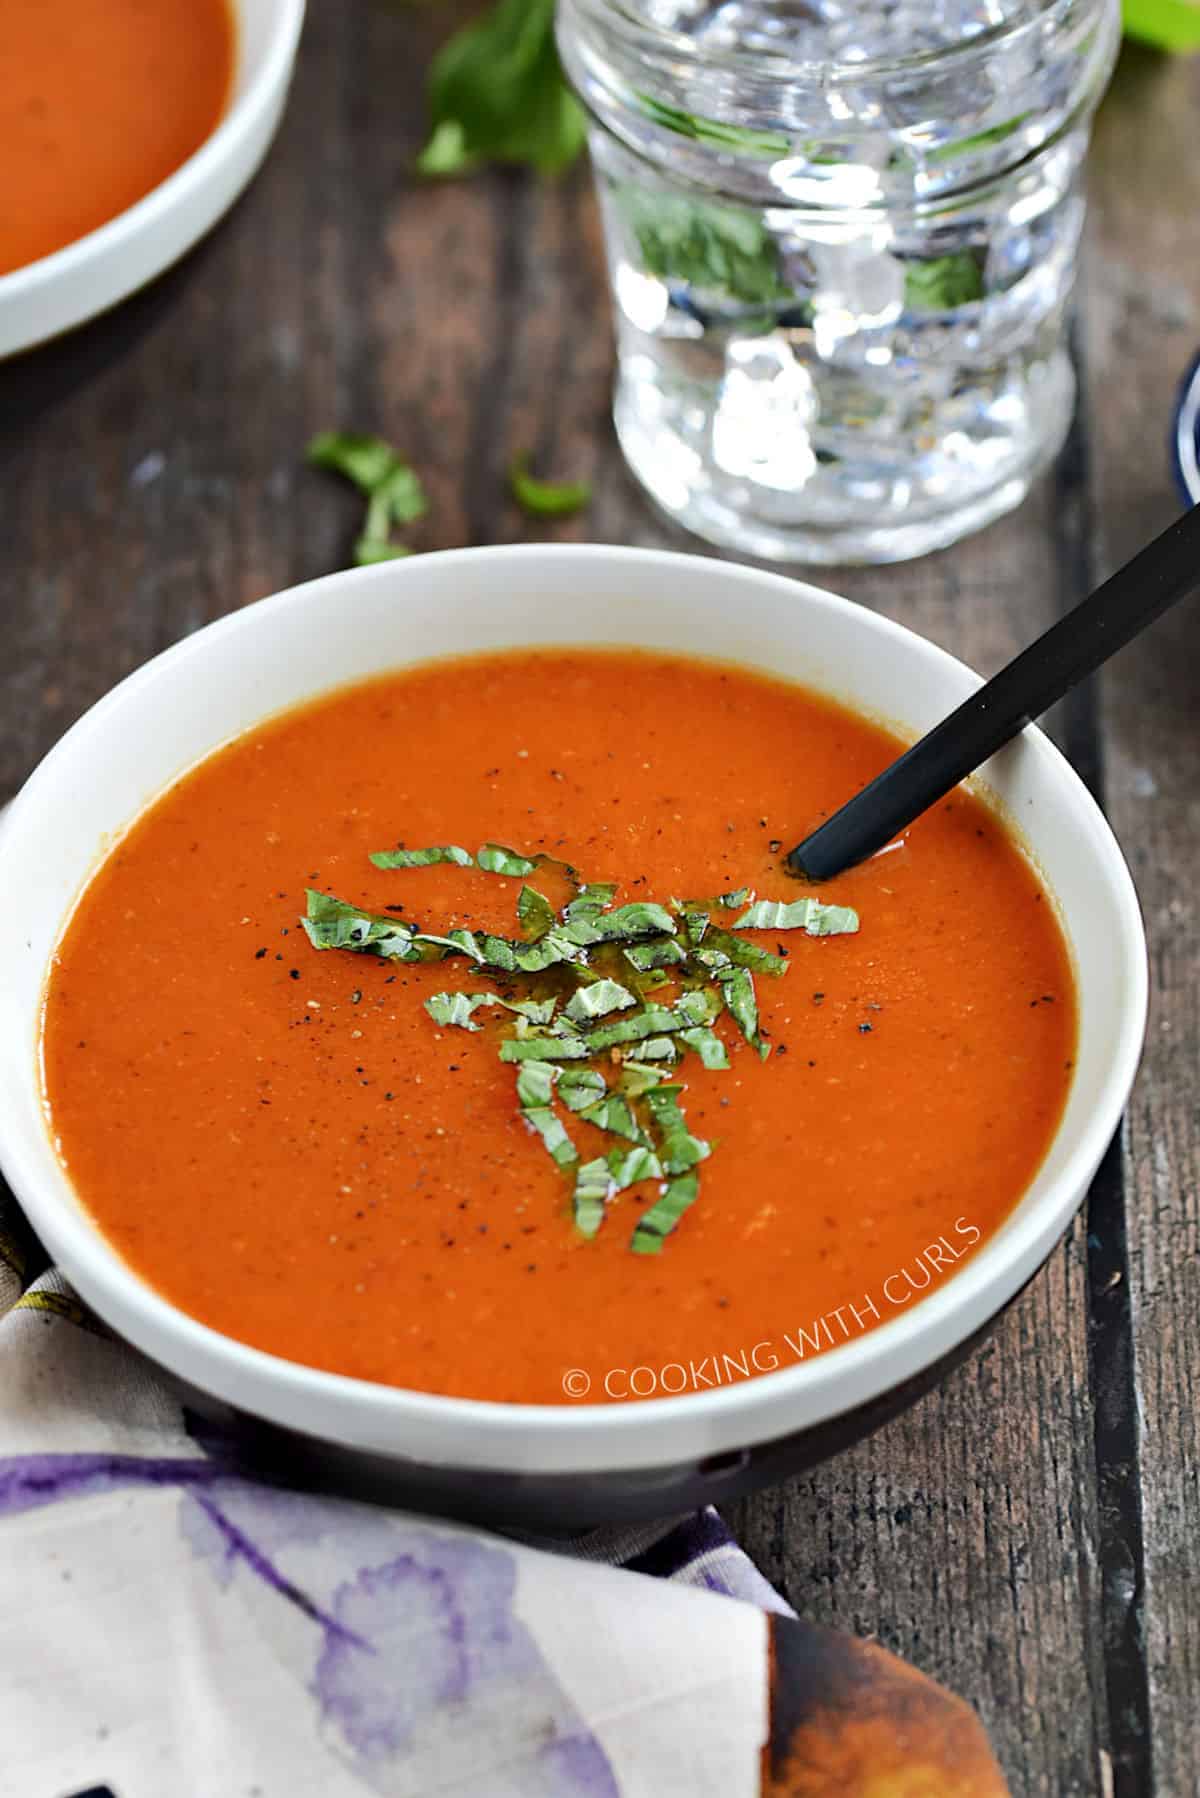 A bowl of tomato soup topped with shredded fresh basil and cracked black pepper.